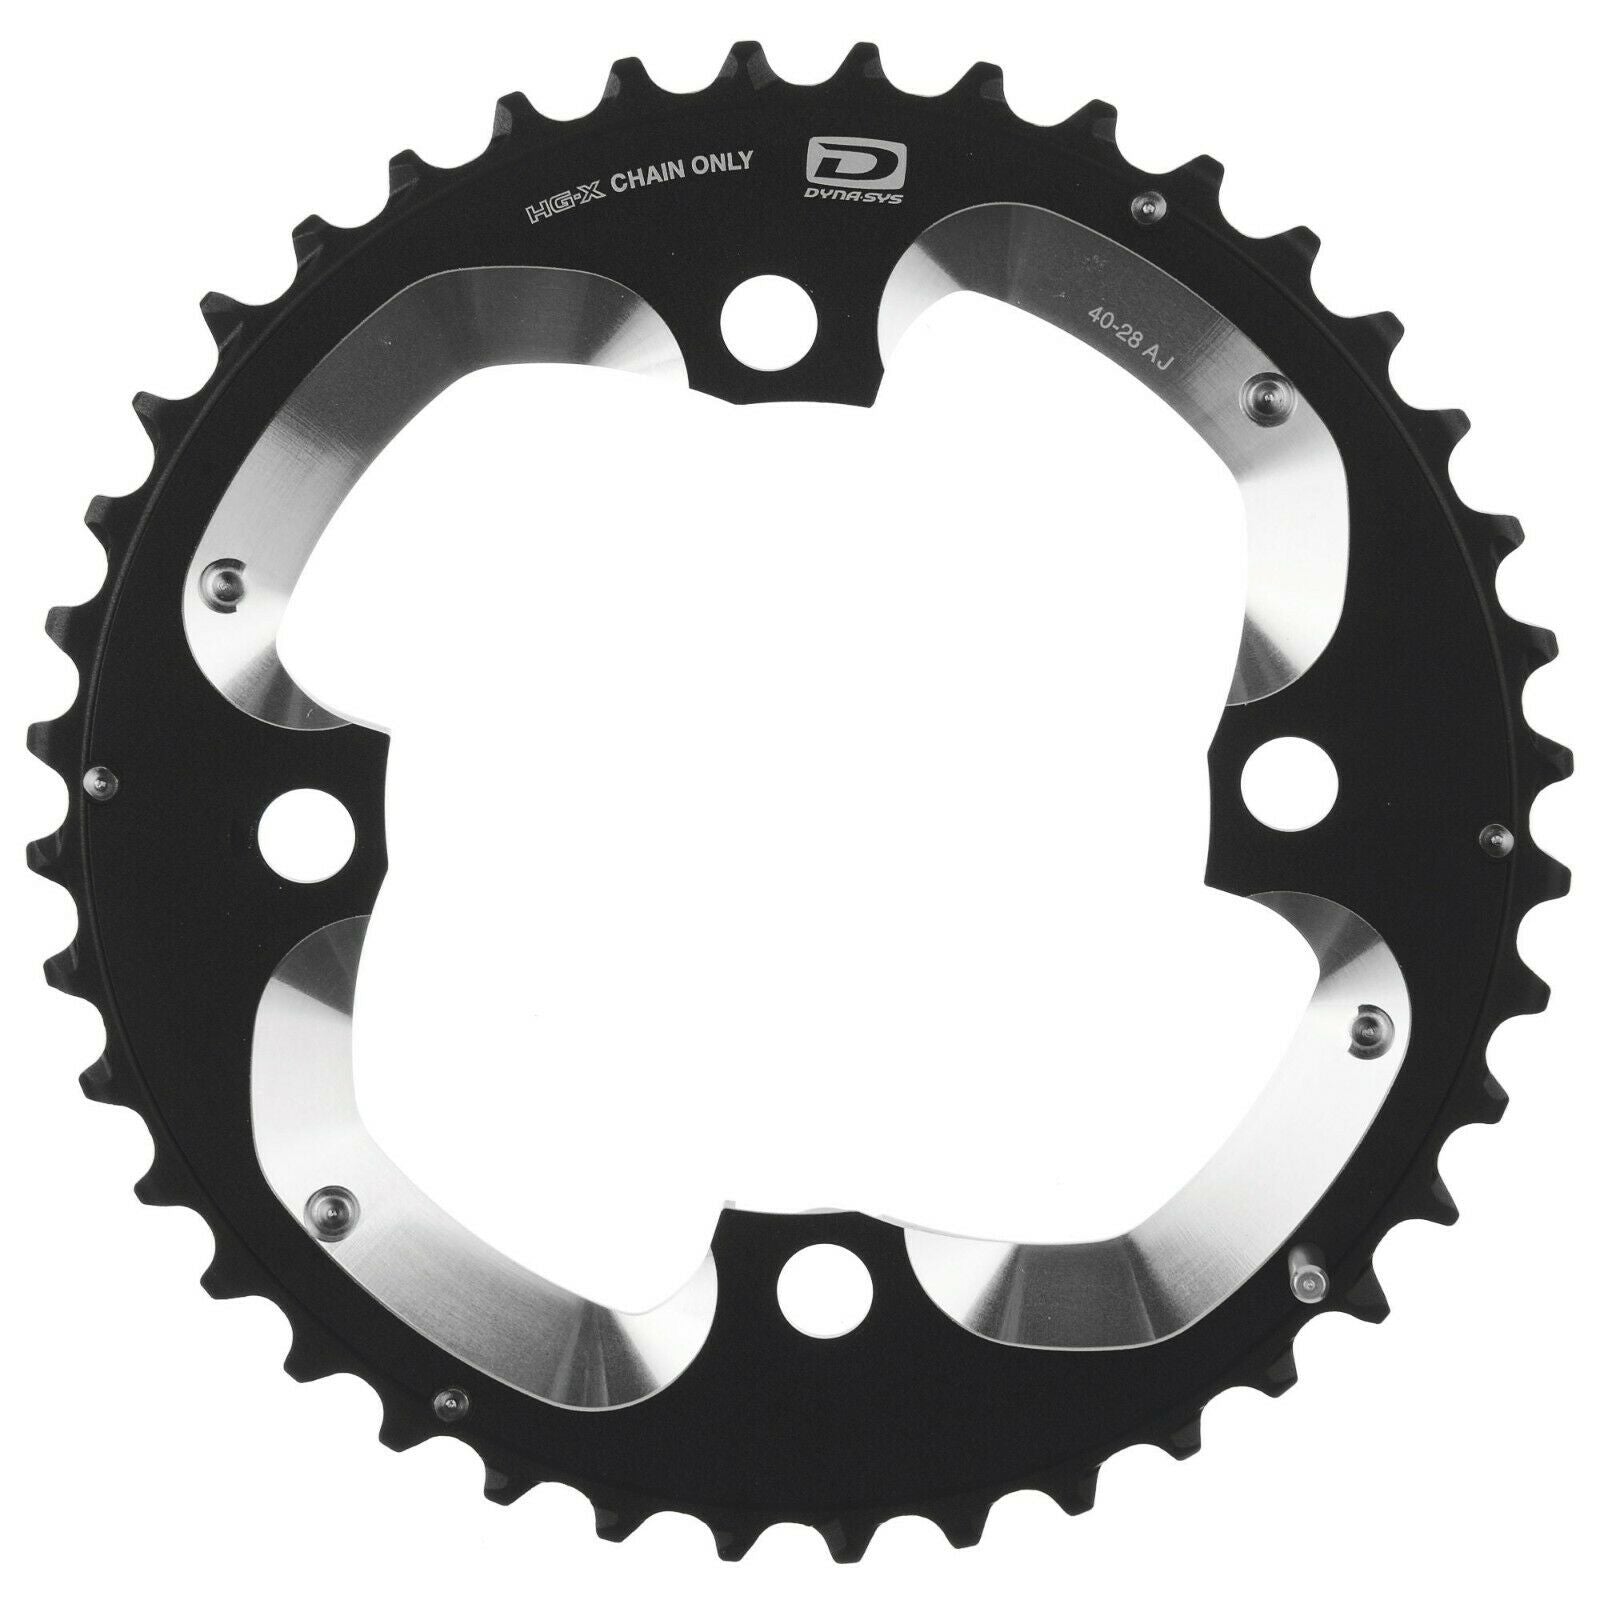 Shimano Deore XT FC-M785 38T 10 Speed Double Chainring - 104mm BCD - 38T-AT - Sportandleisure.com (7507450921217)